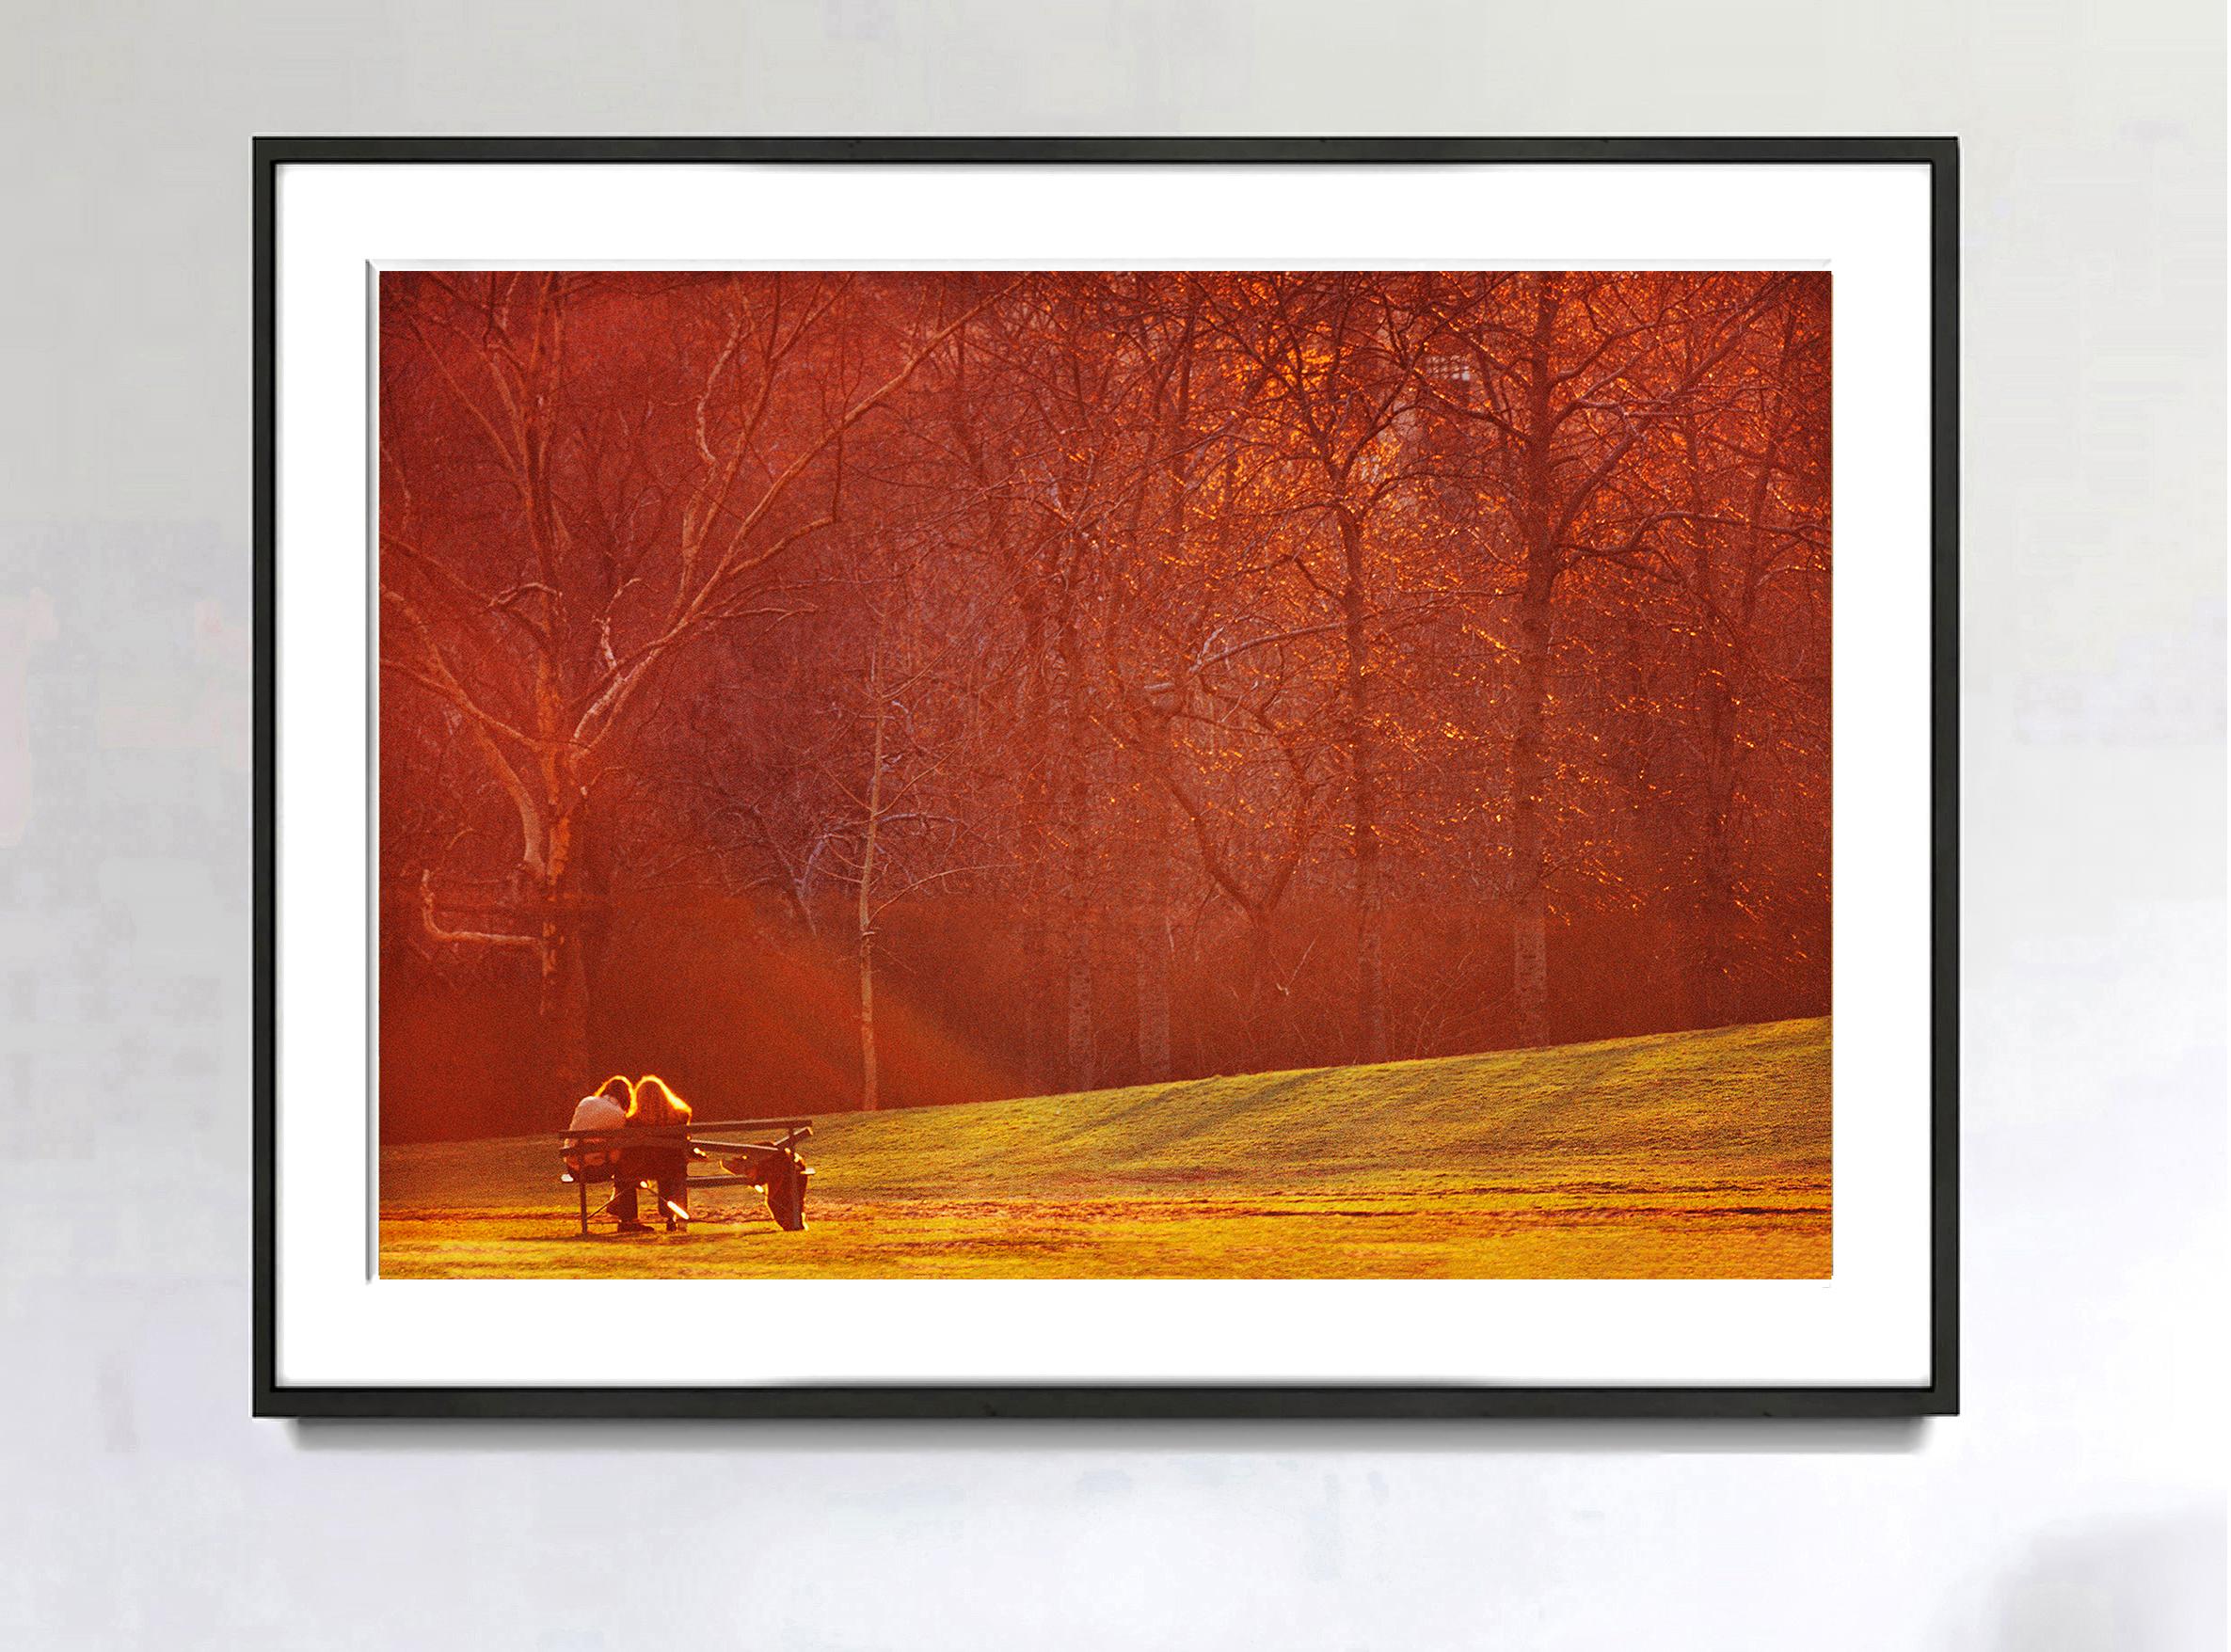 Golden Light Illuminates a Romantic Couple in Central Park - Amber and Orange  For Sale 1